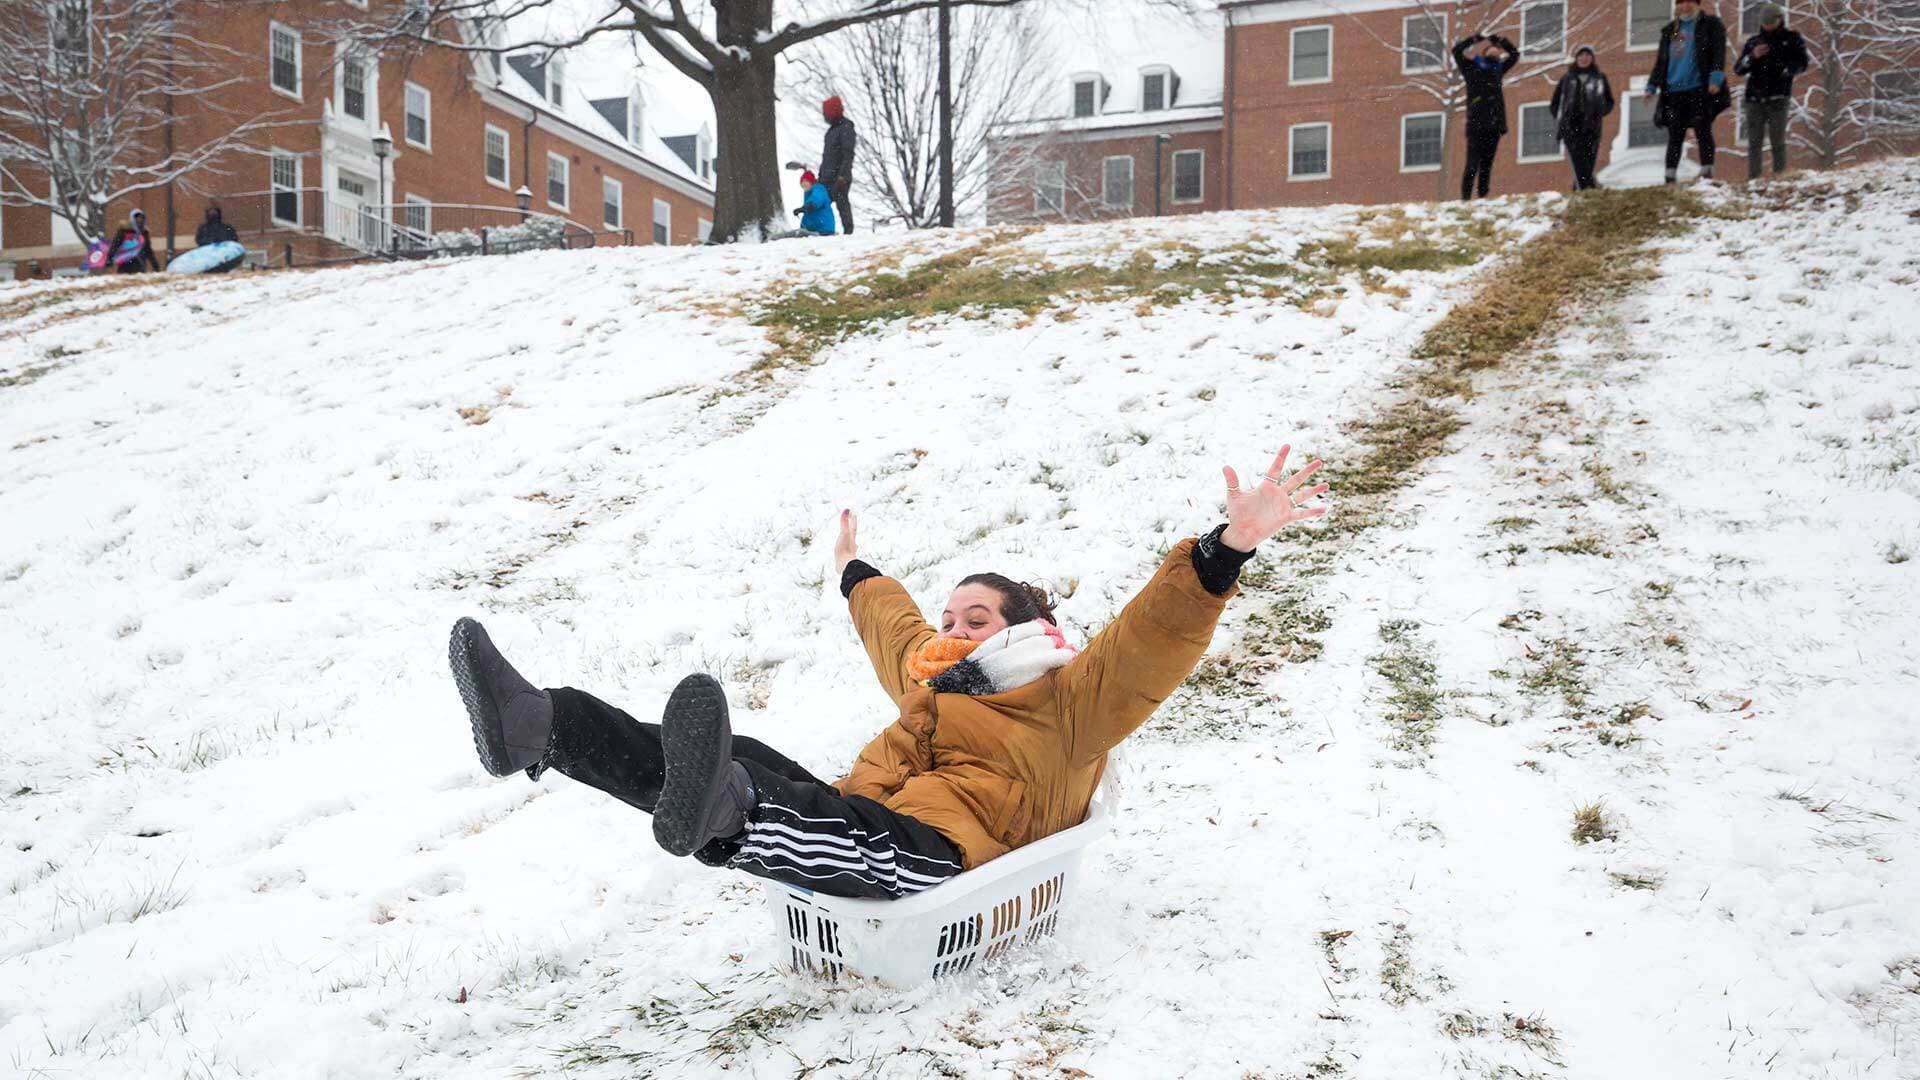 Student sleds down snowy hill in laundry basket